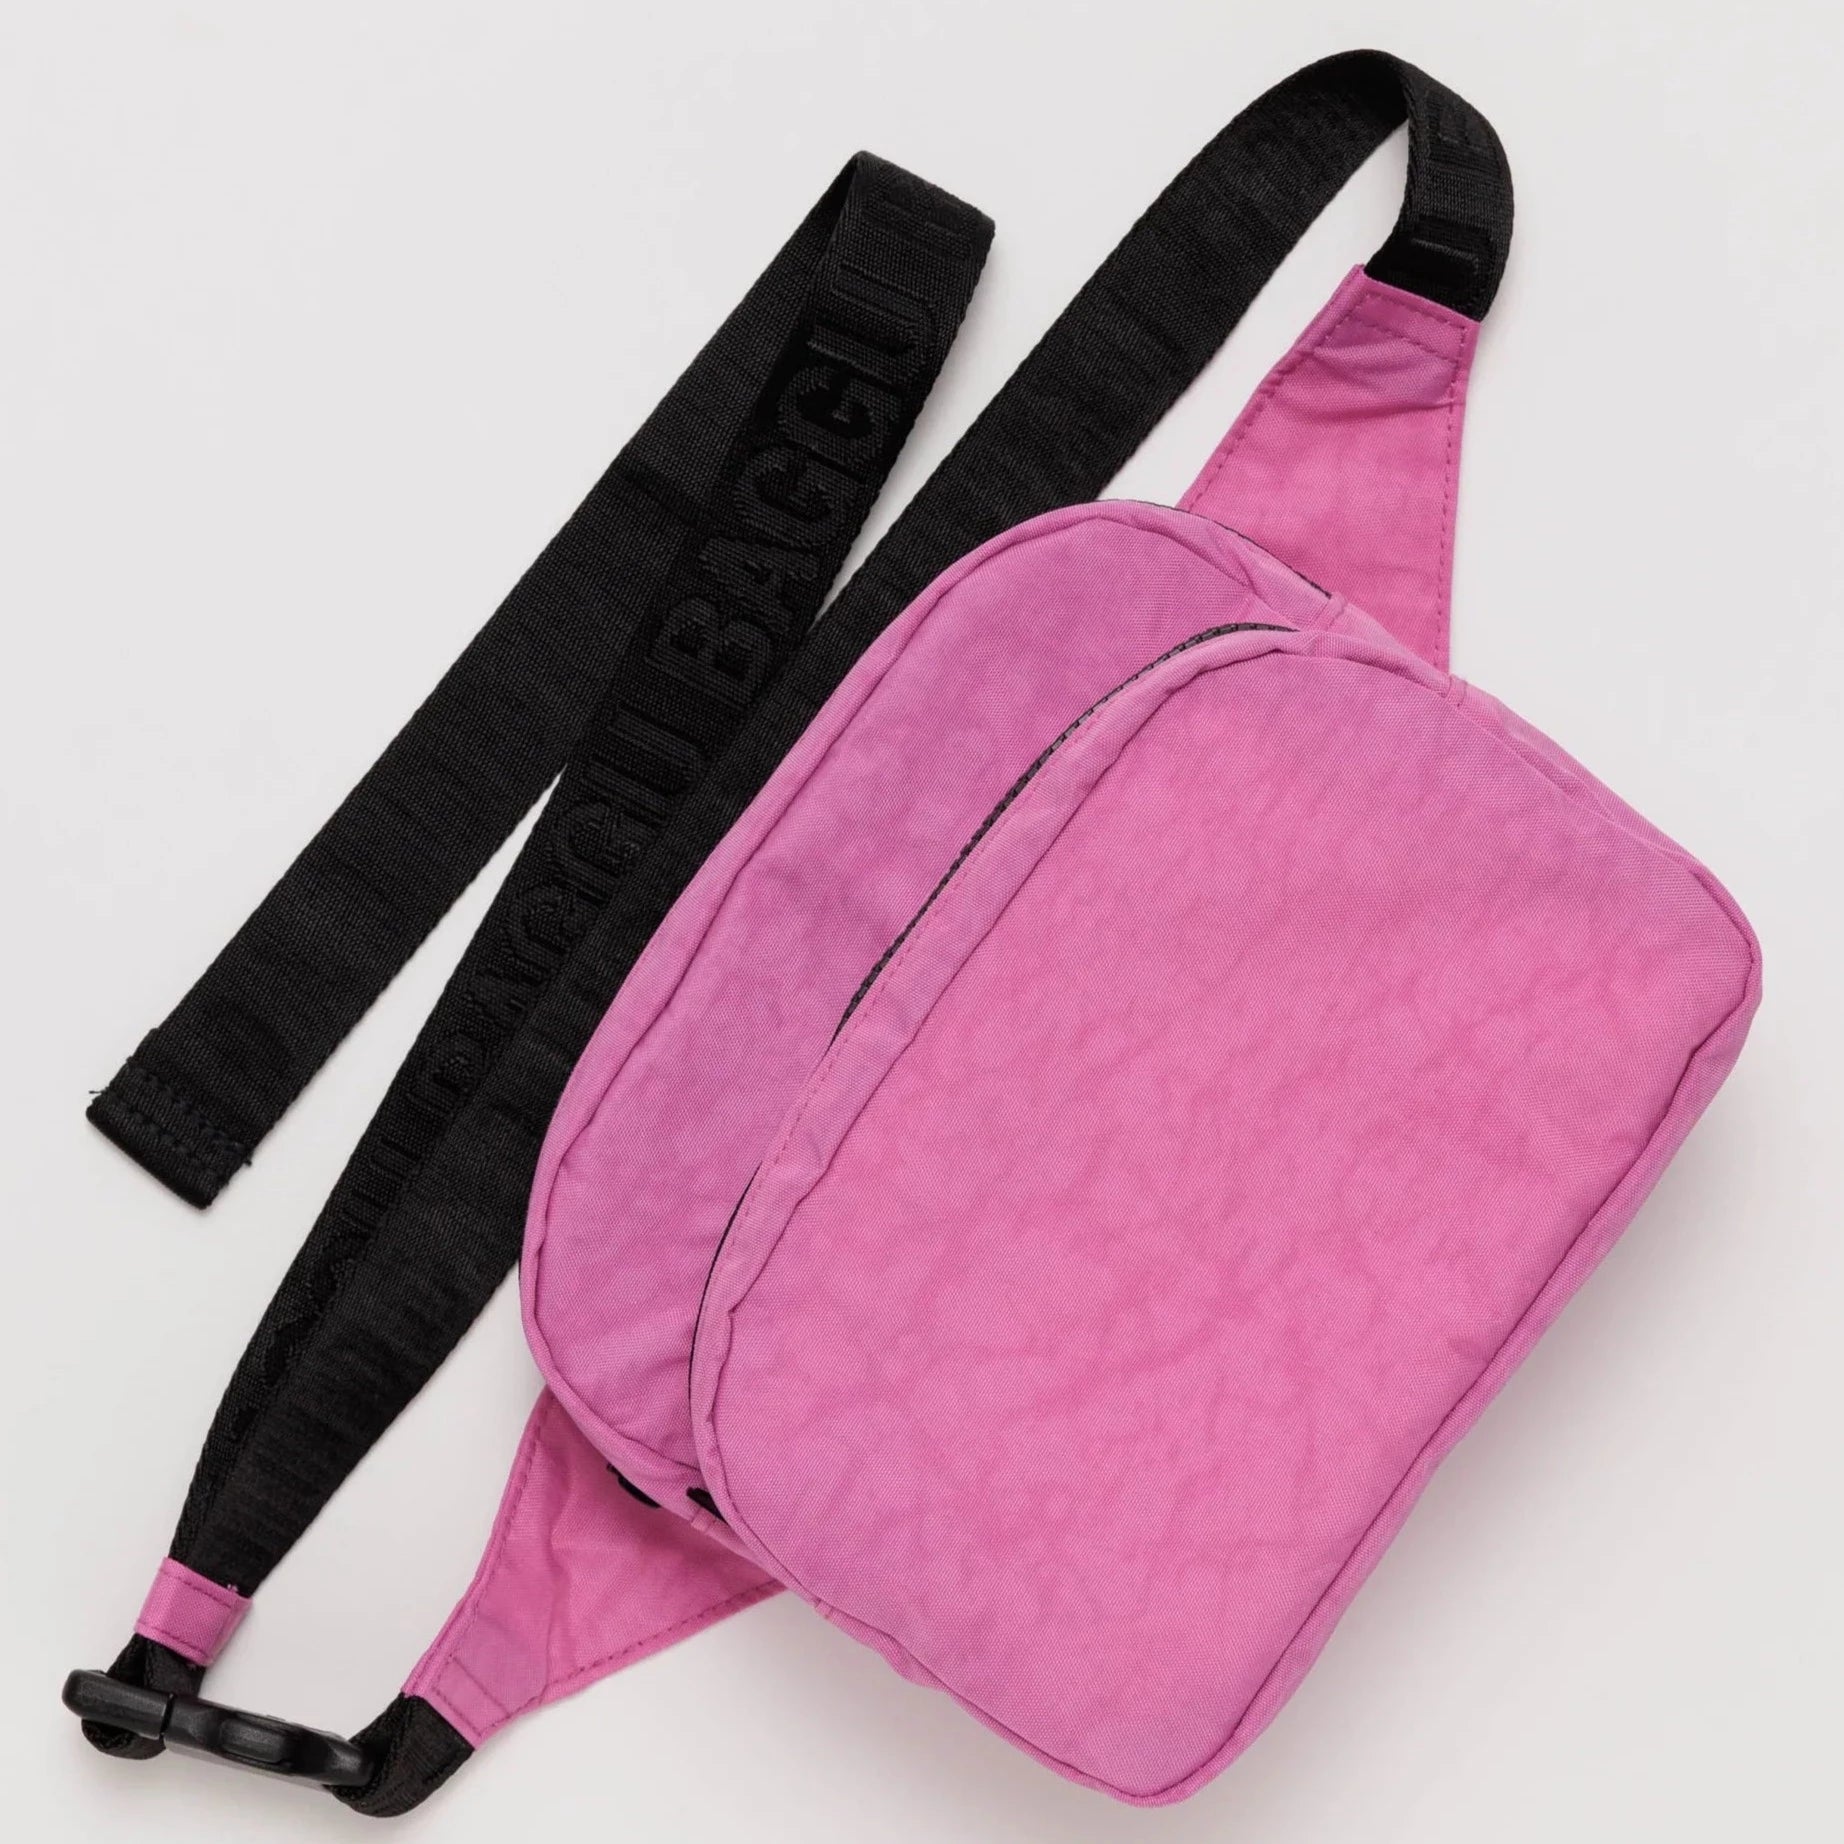 Baggu Fanny Pack Extra Pink| Prelude and Dawn | Los Angeles, CA